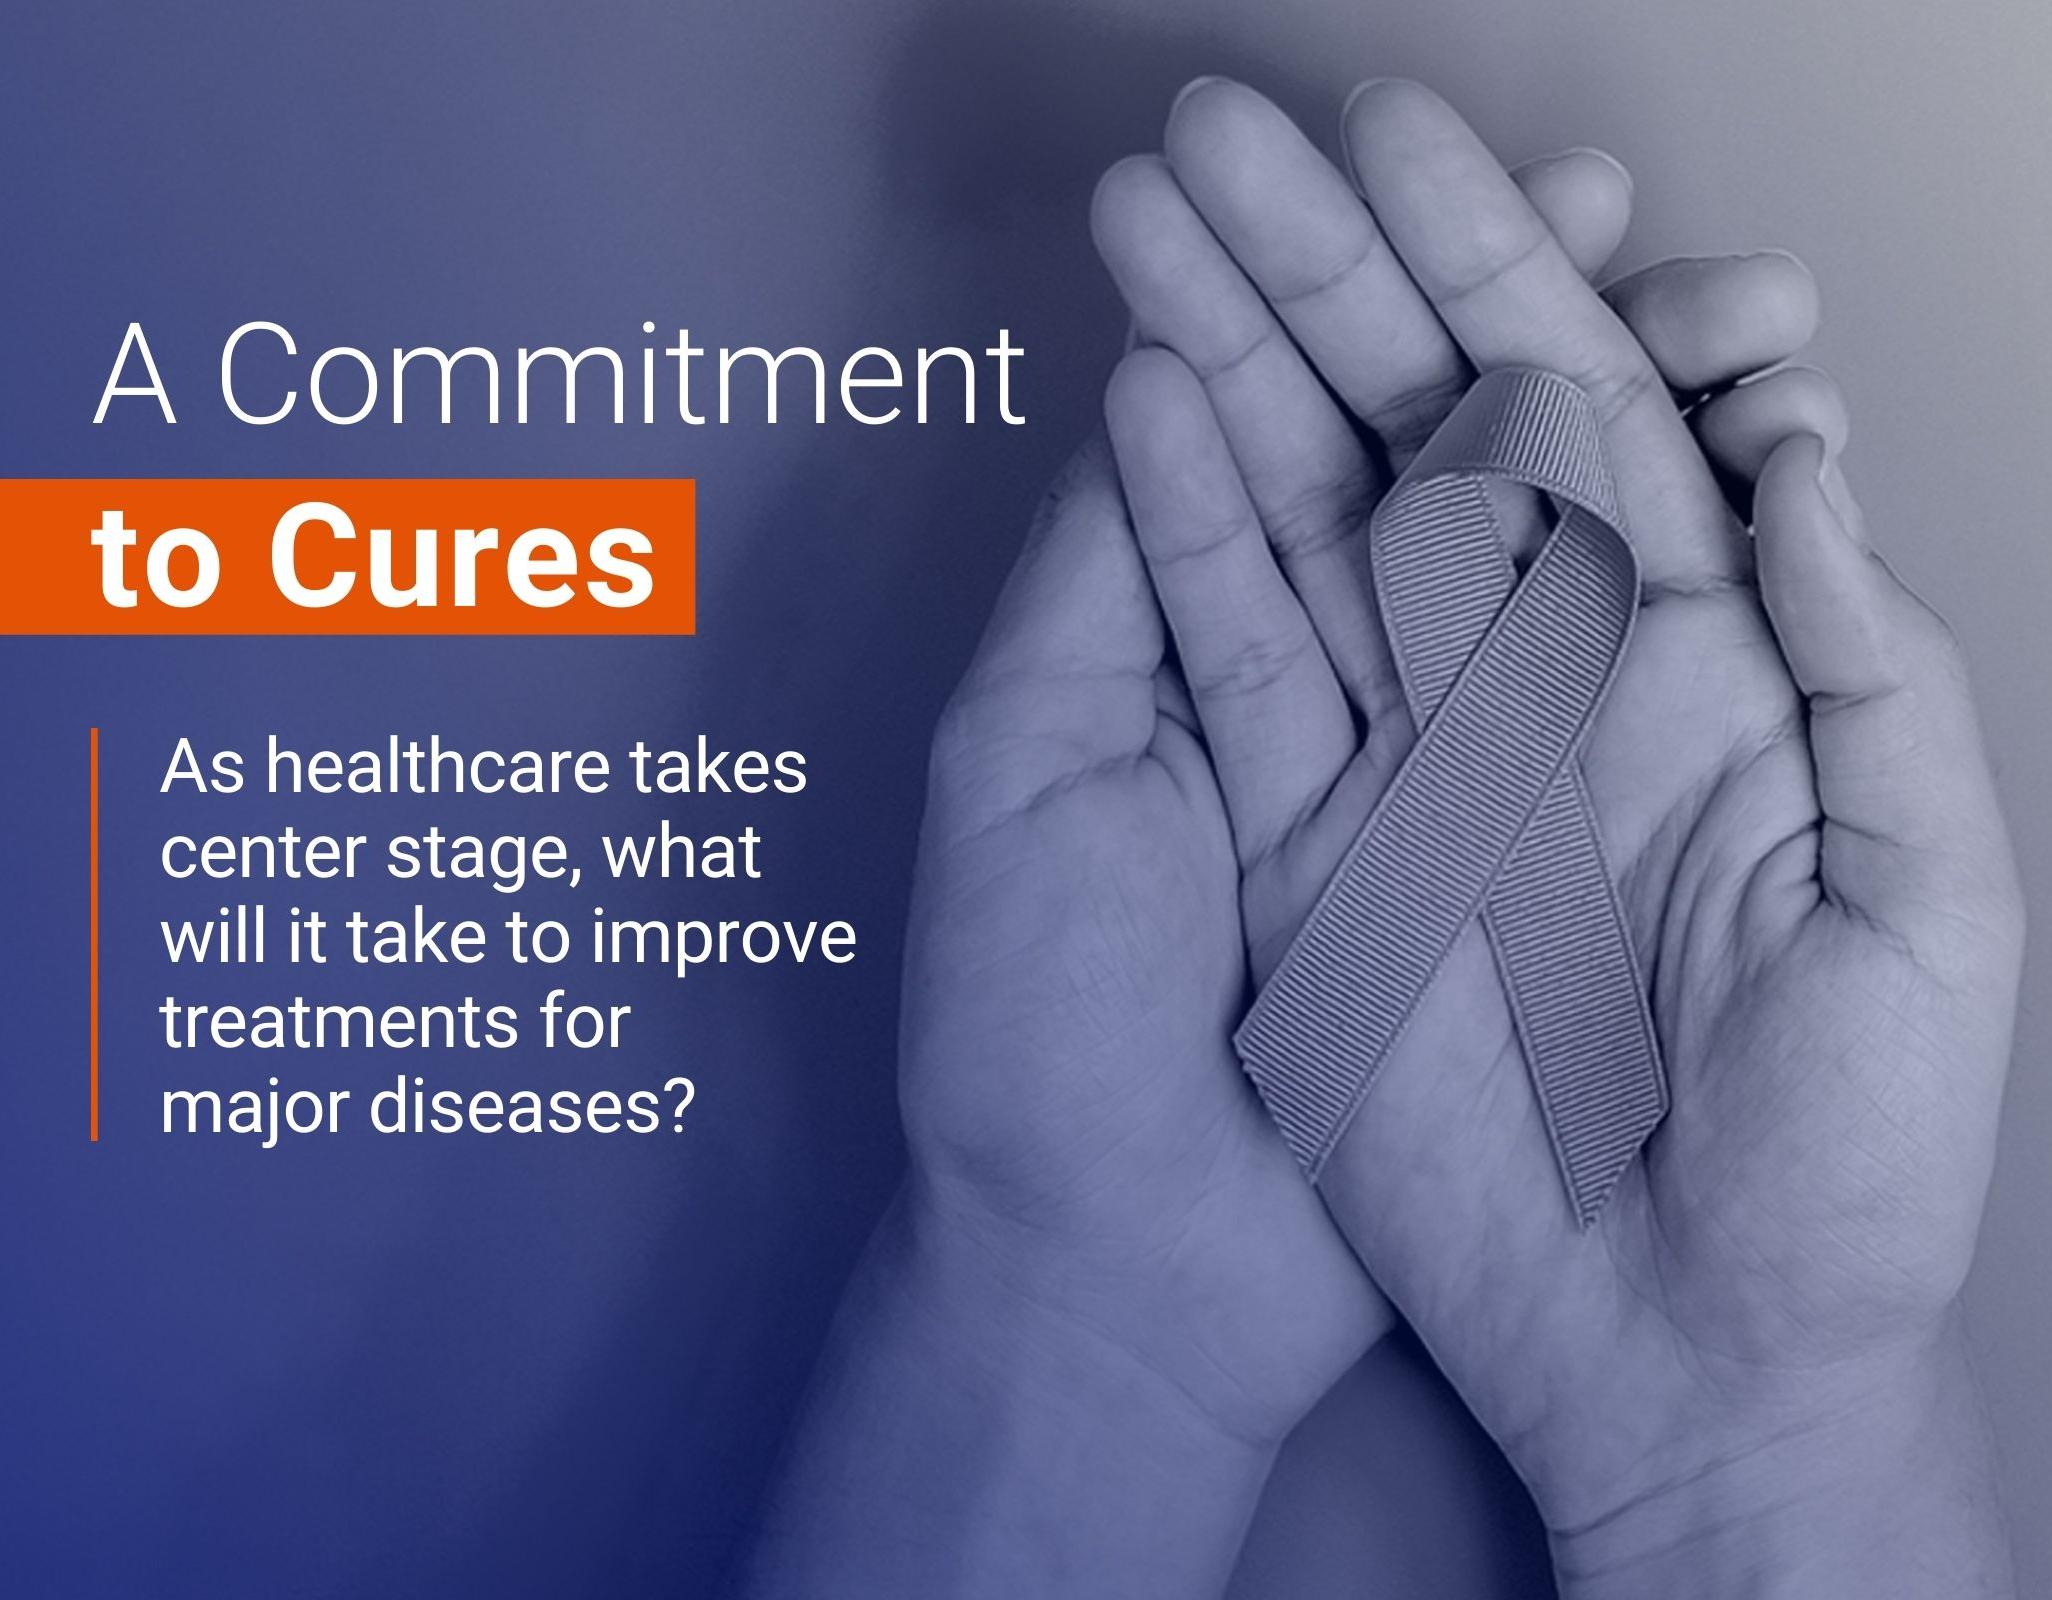 A commitment to cures: As healthcare takes center stage, what will it take to improve treatments for major diseases?